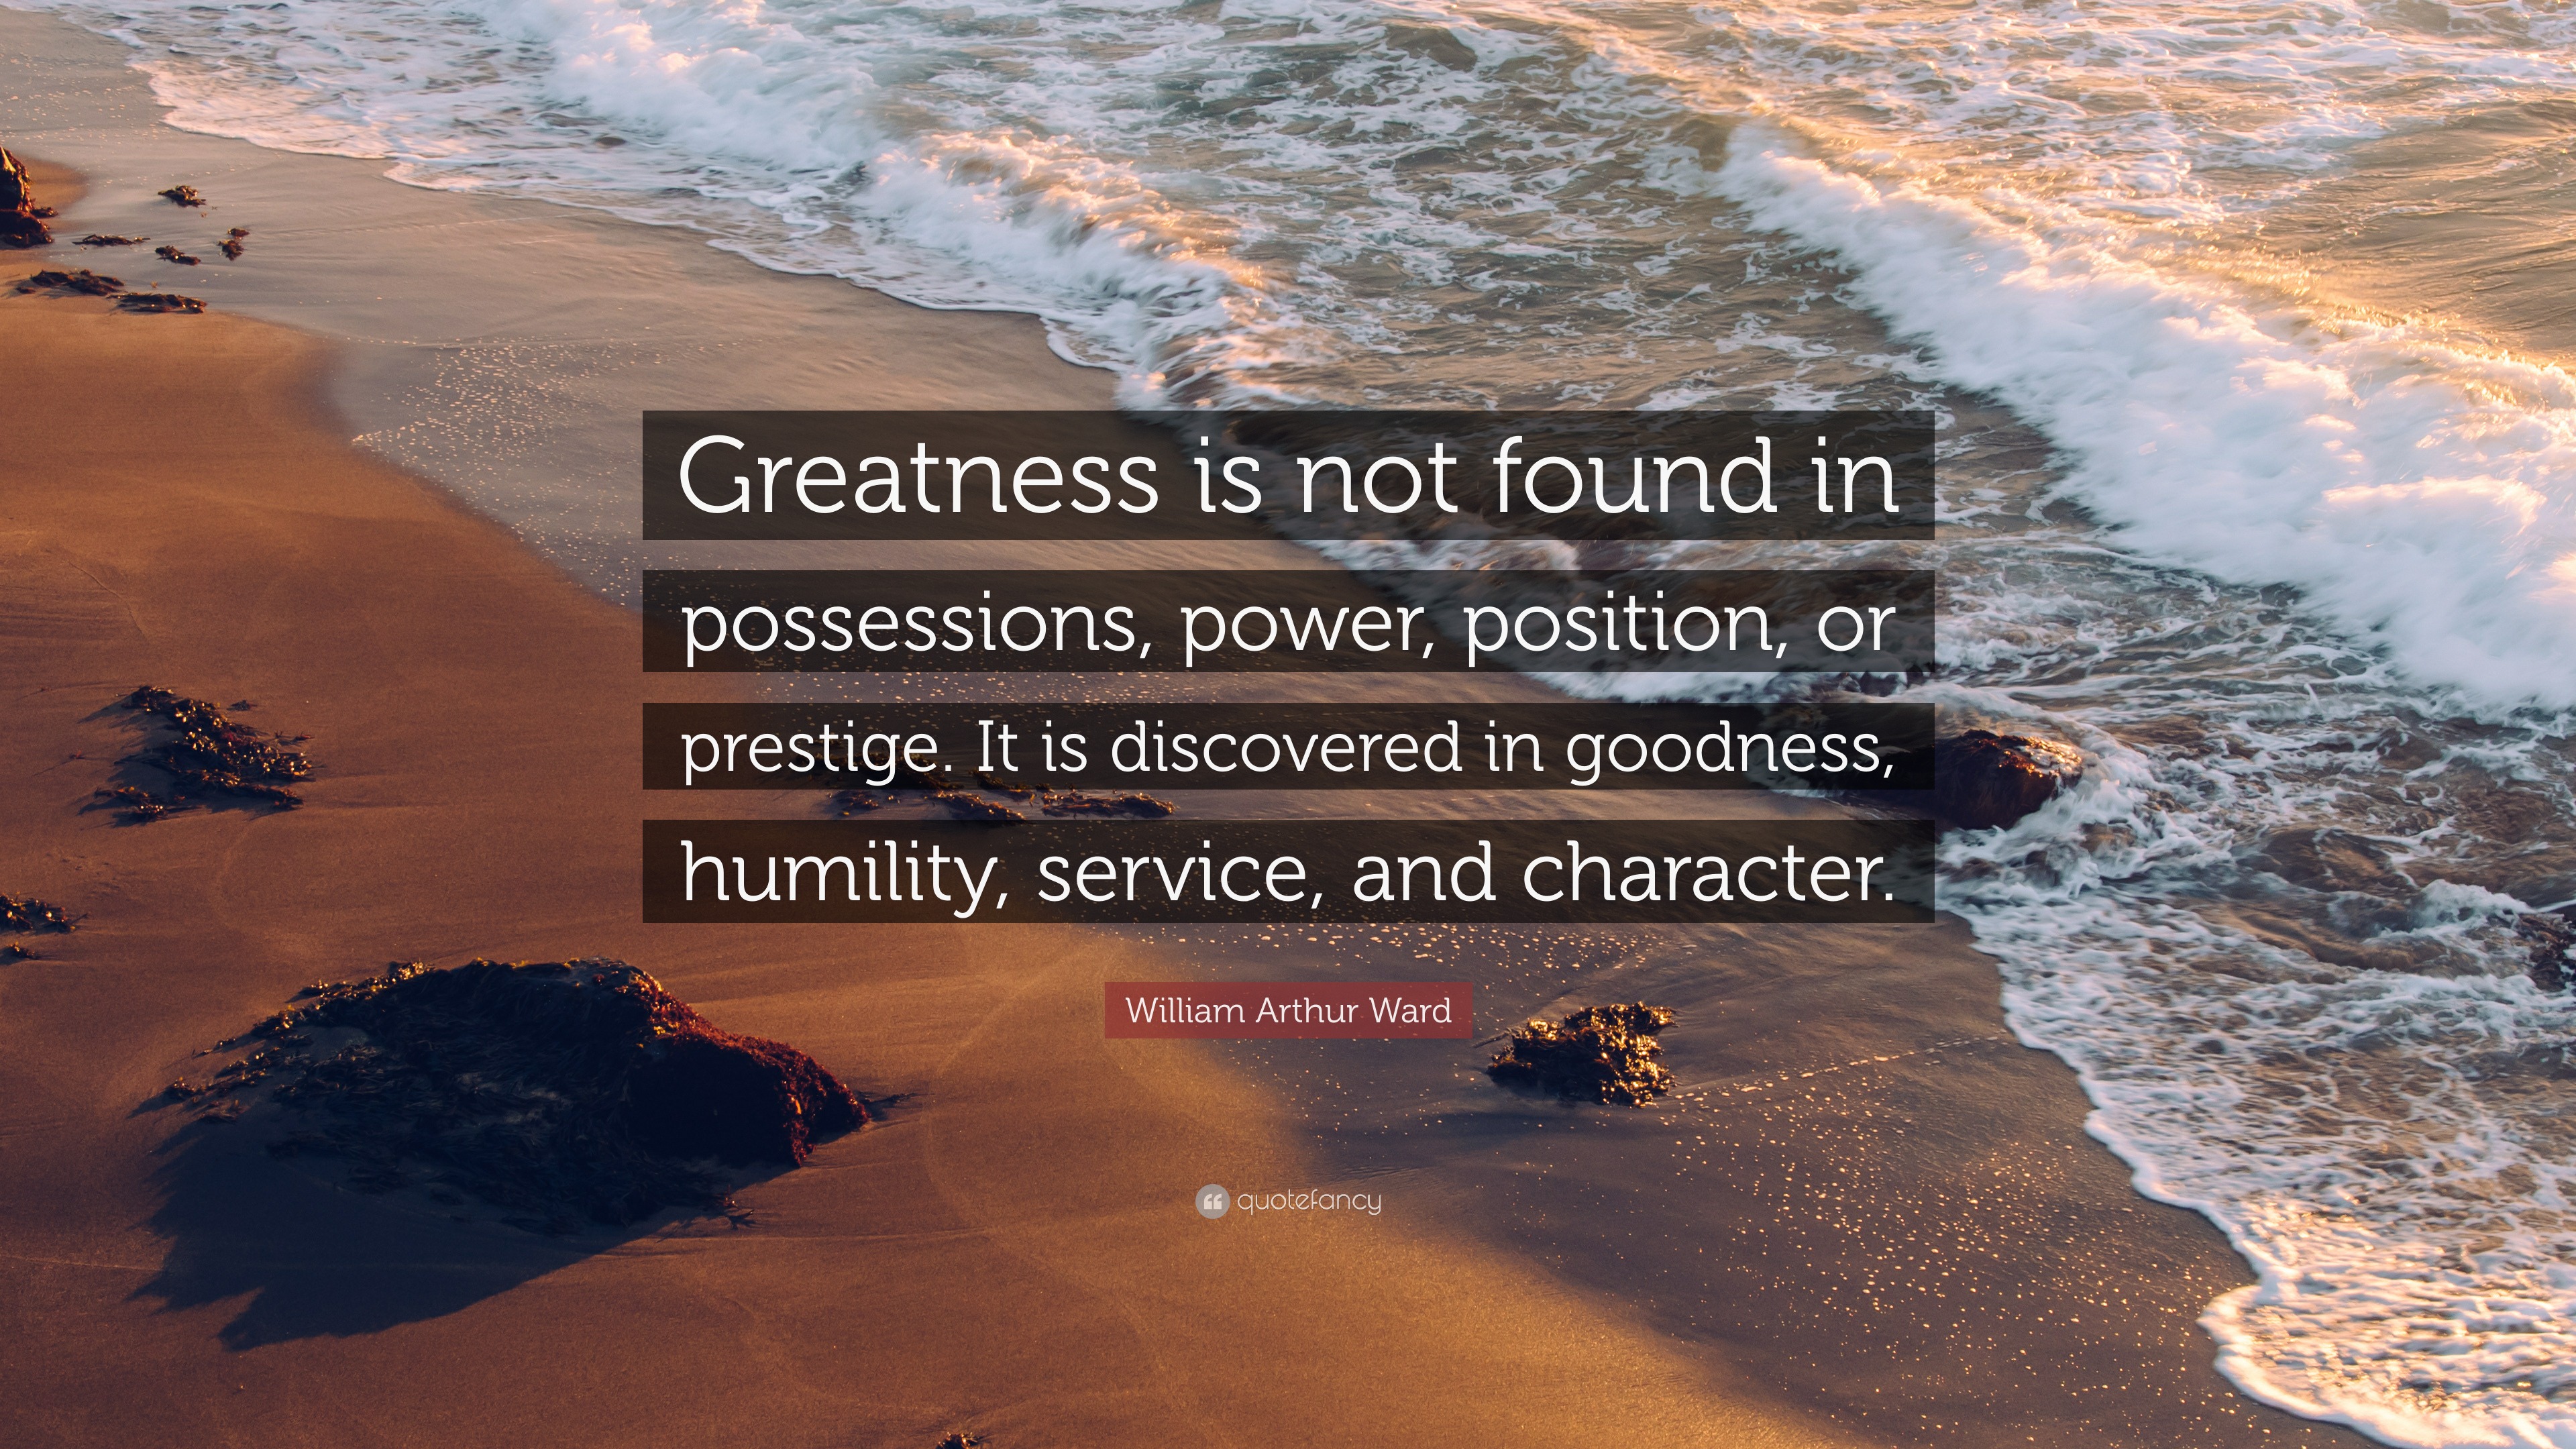 Humility Quotes (40 wallpapers) - Quotefancy